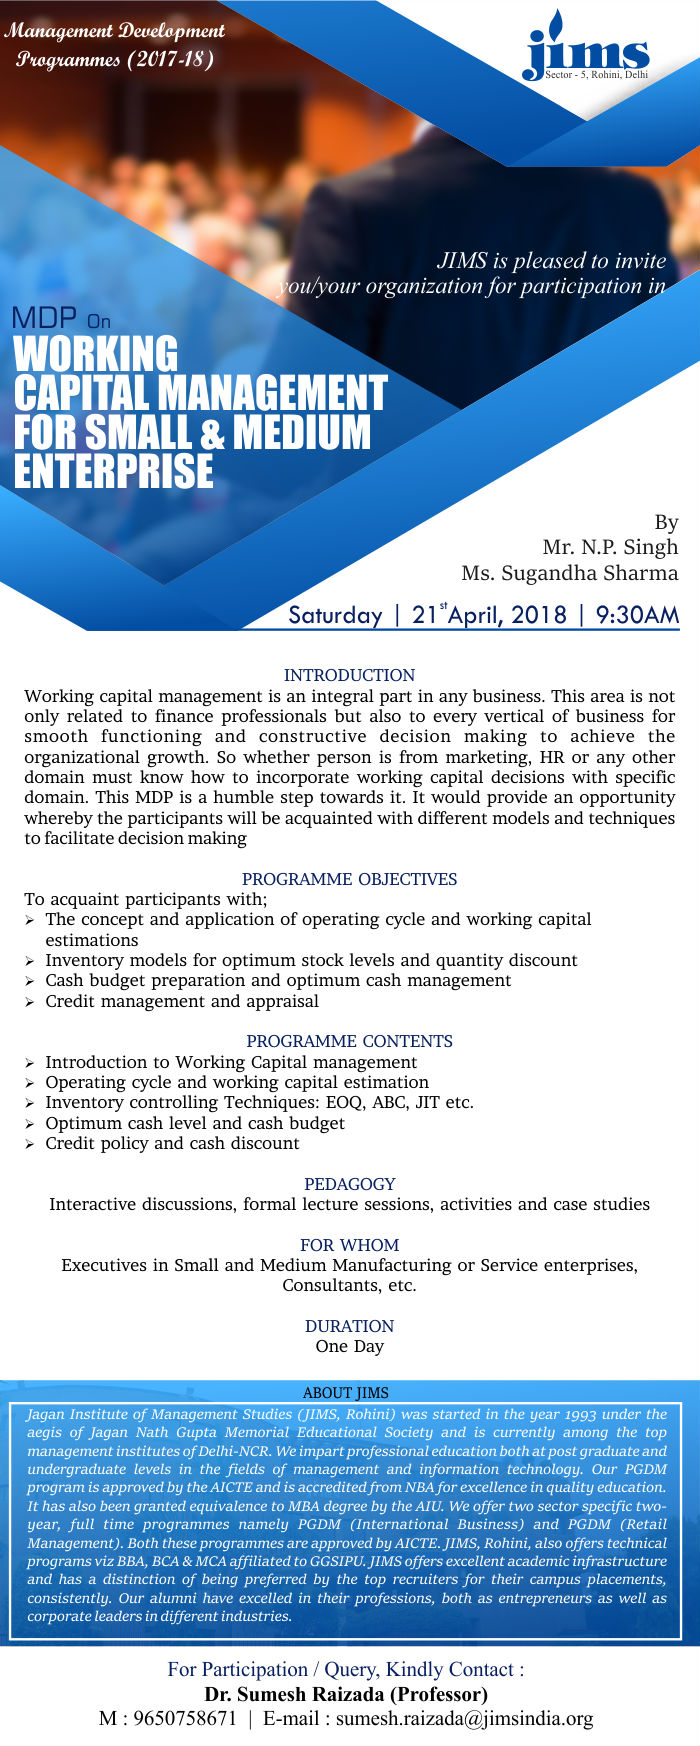 MDP On Working Capital Management for Small and Medium Enterprises